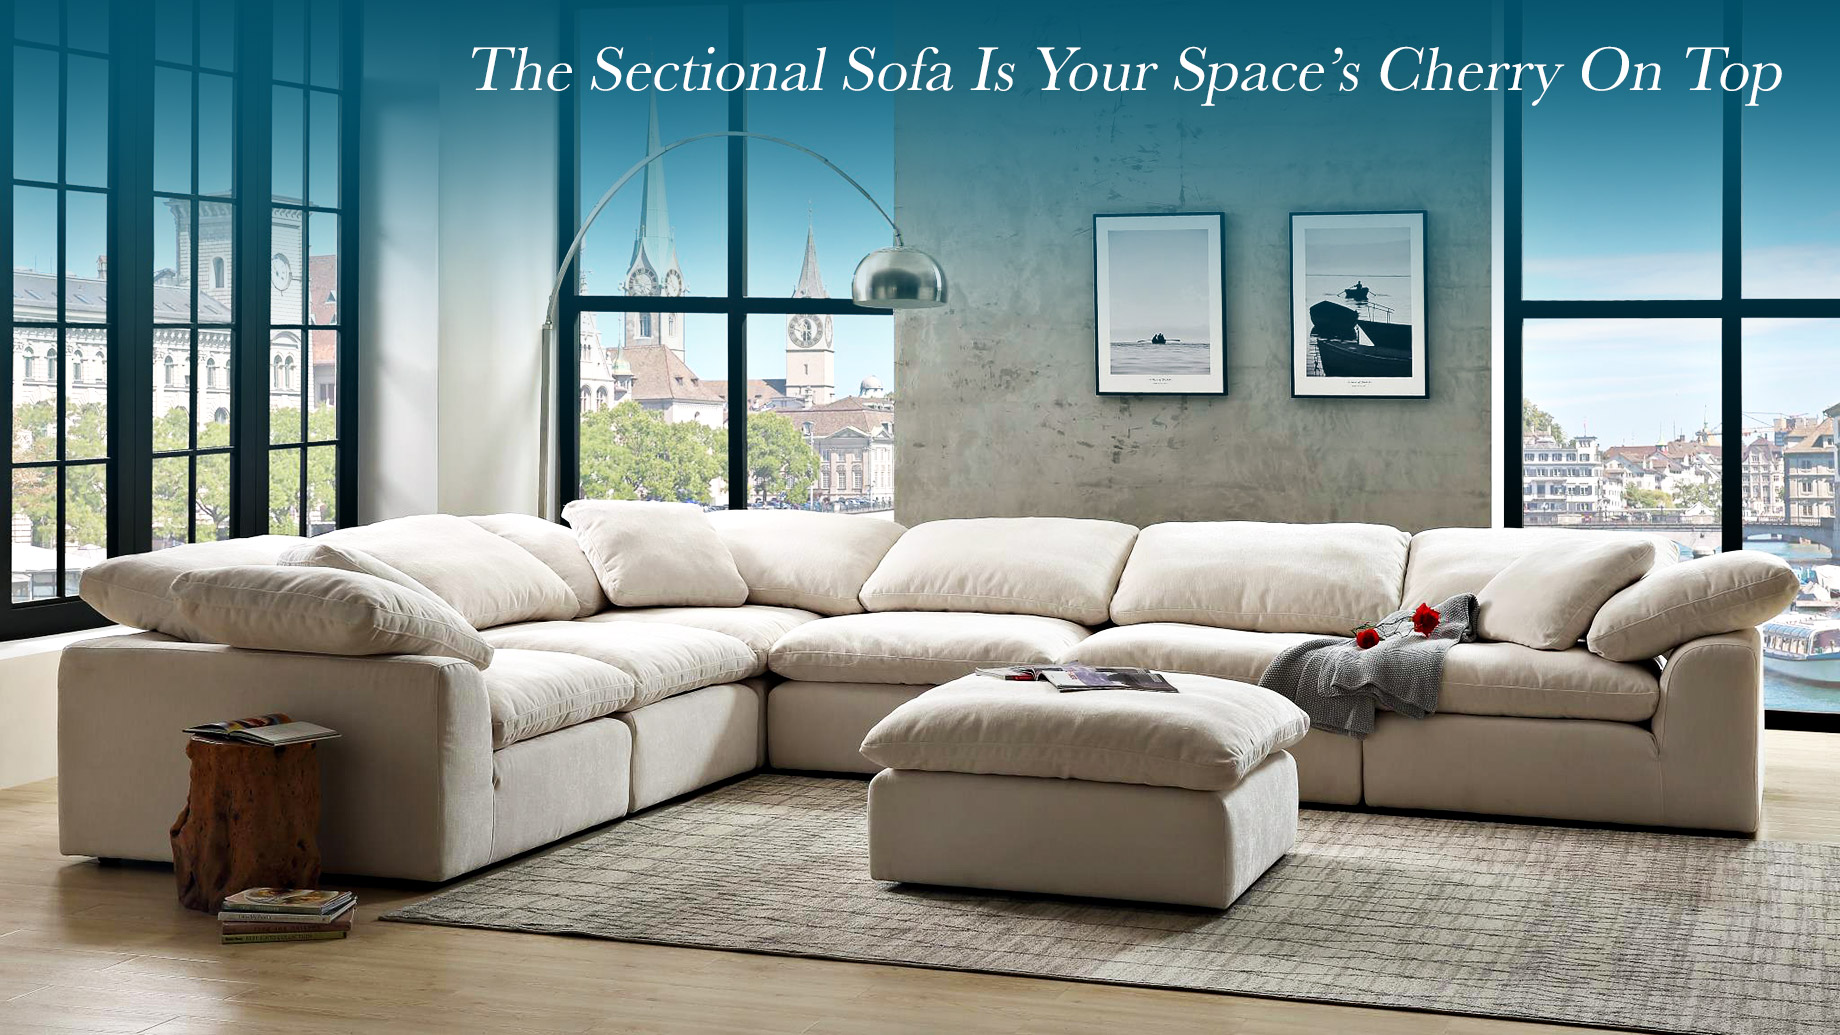 The Sectional Sofa Is Your Space’s Cherry On Top